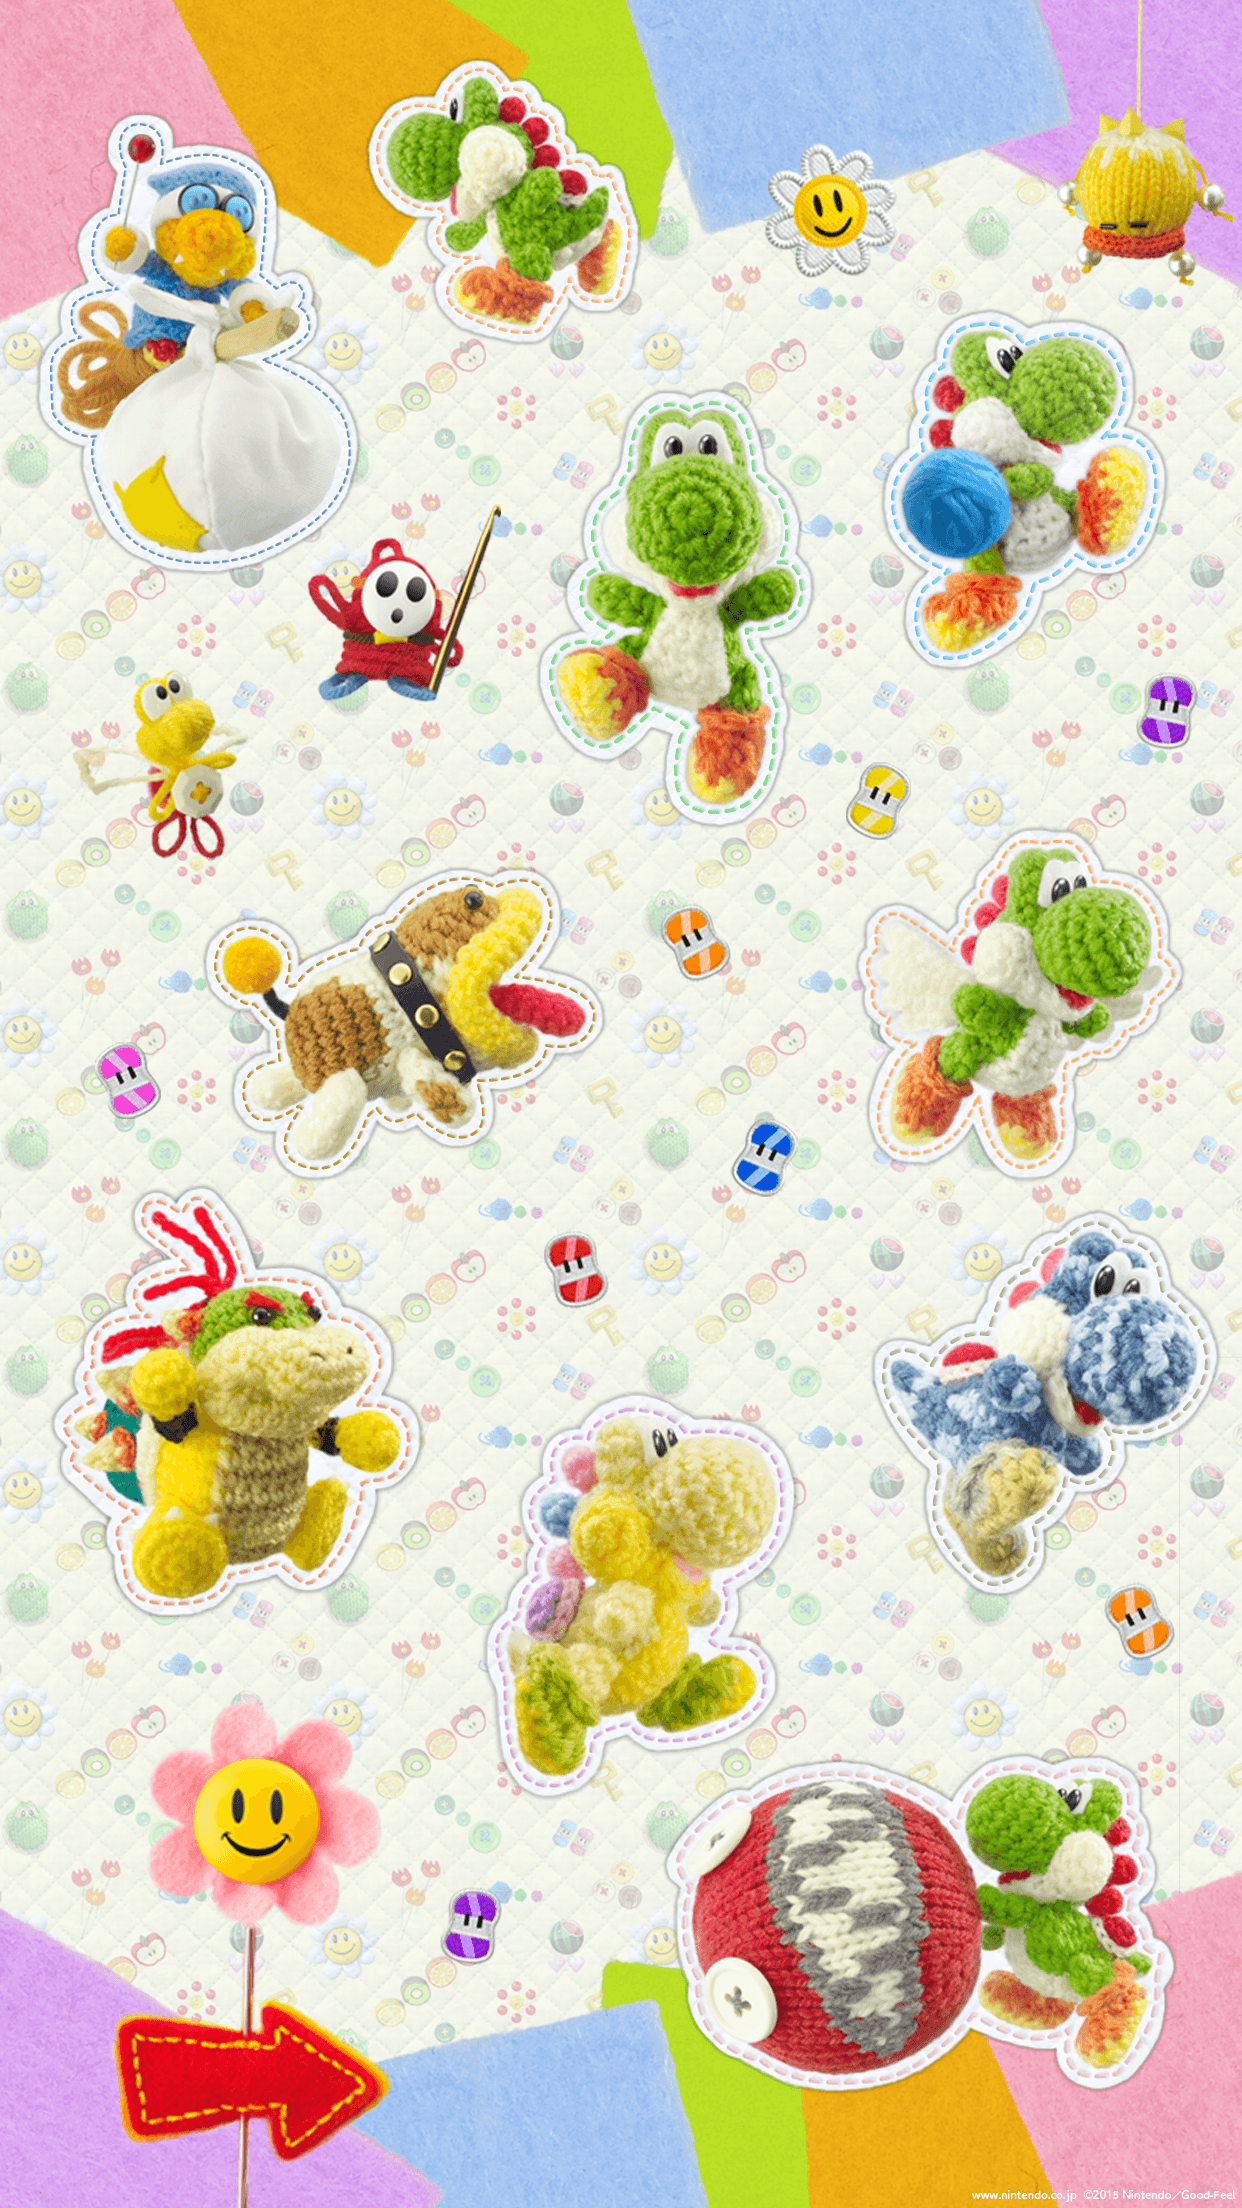 Yoshi's Woolly World is another 2D platforming game from Nintendo